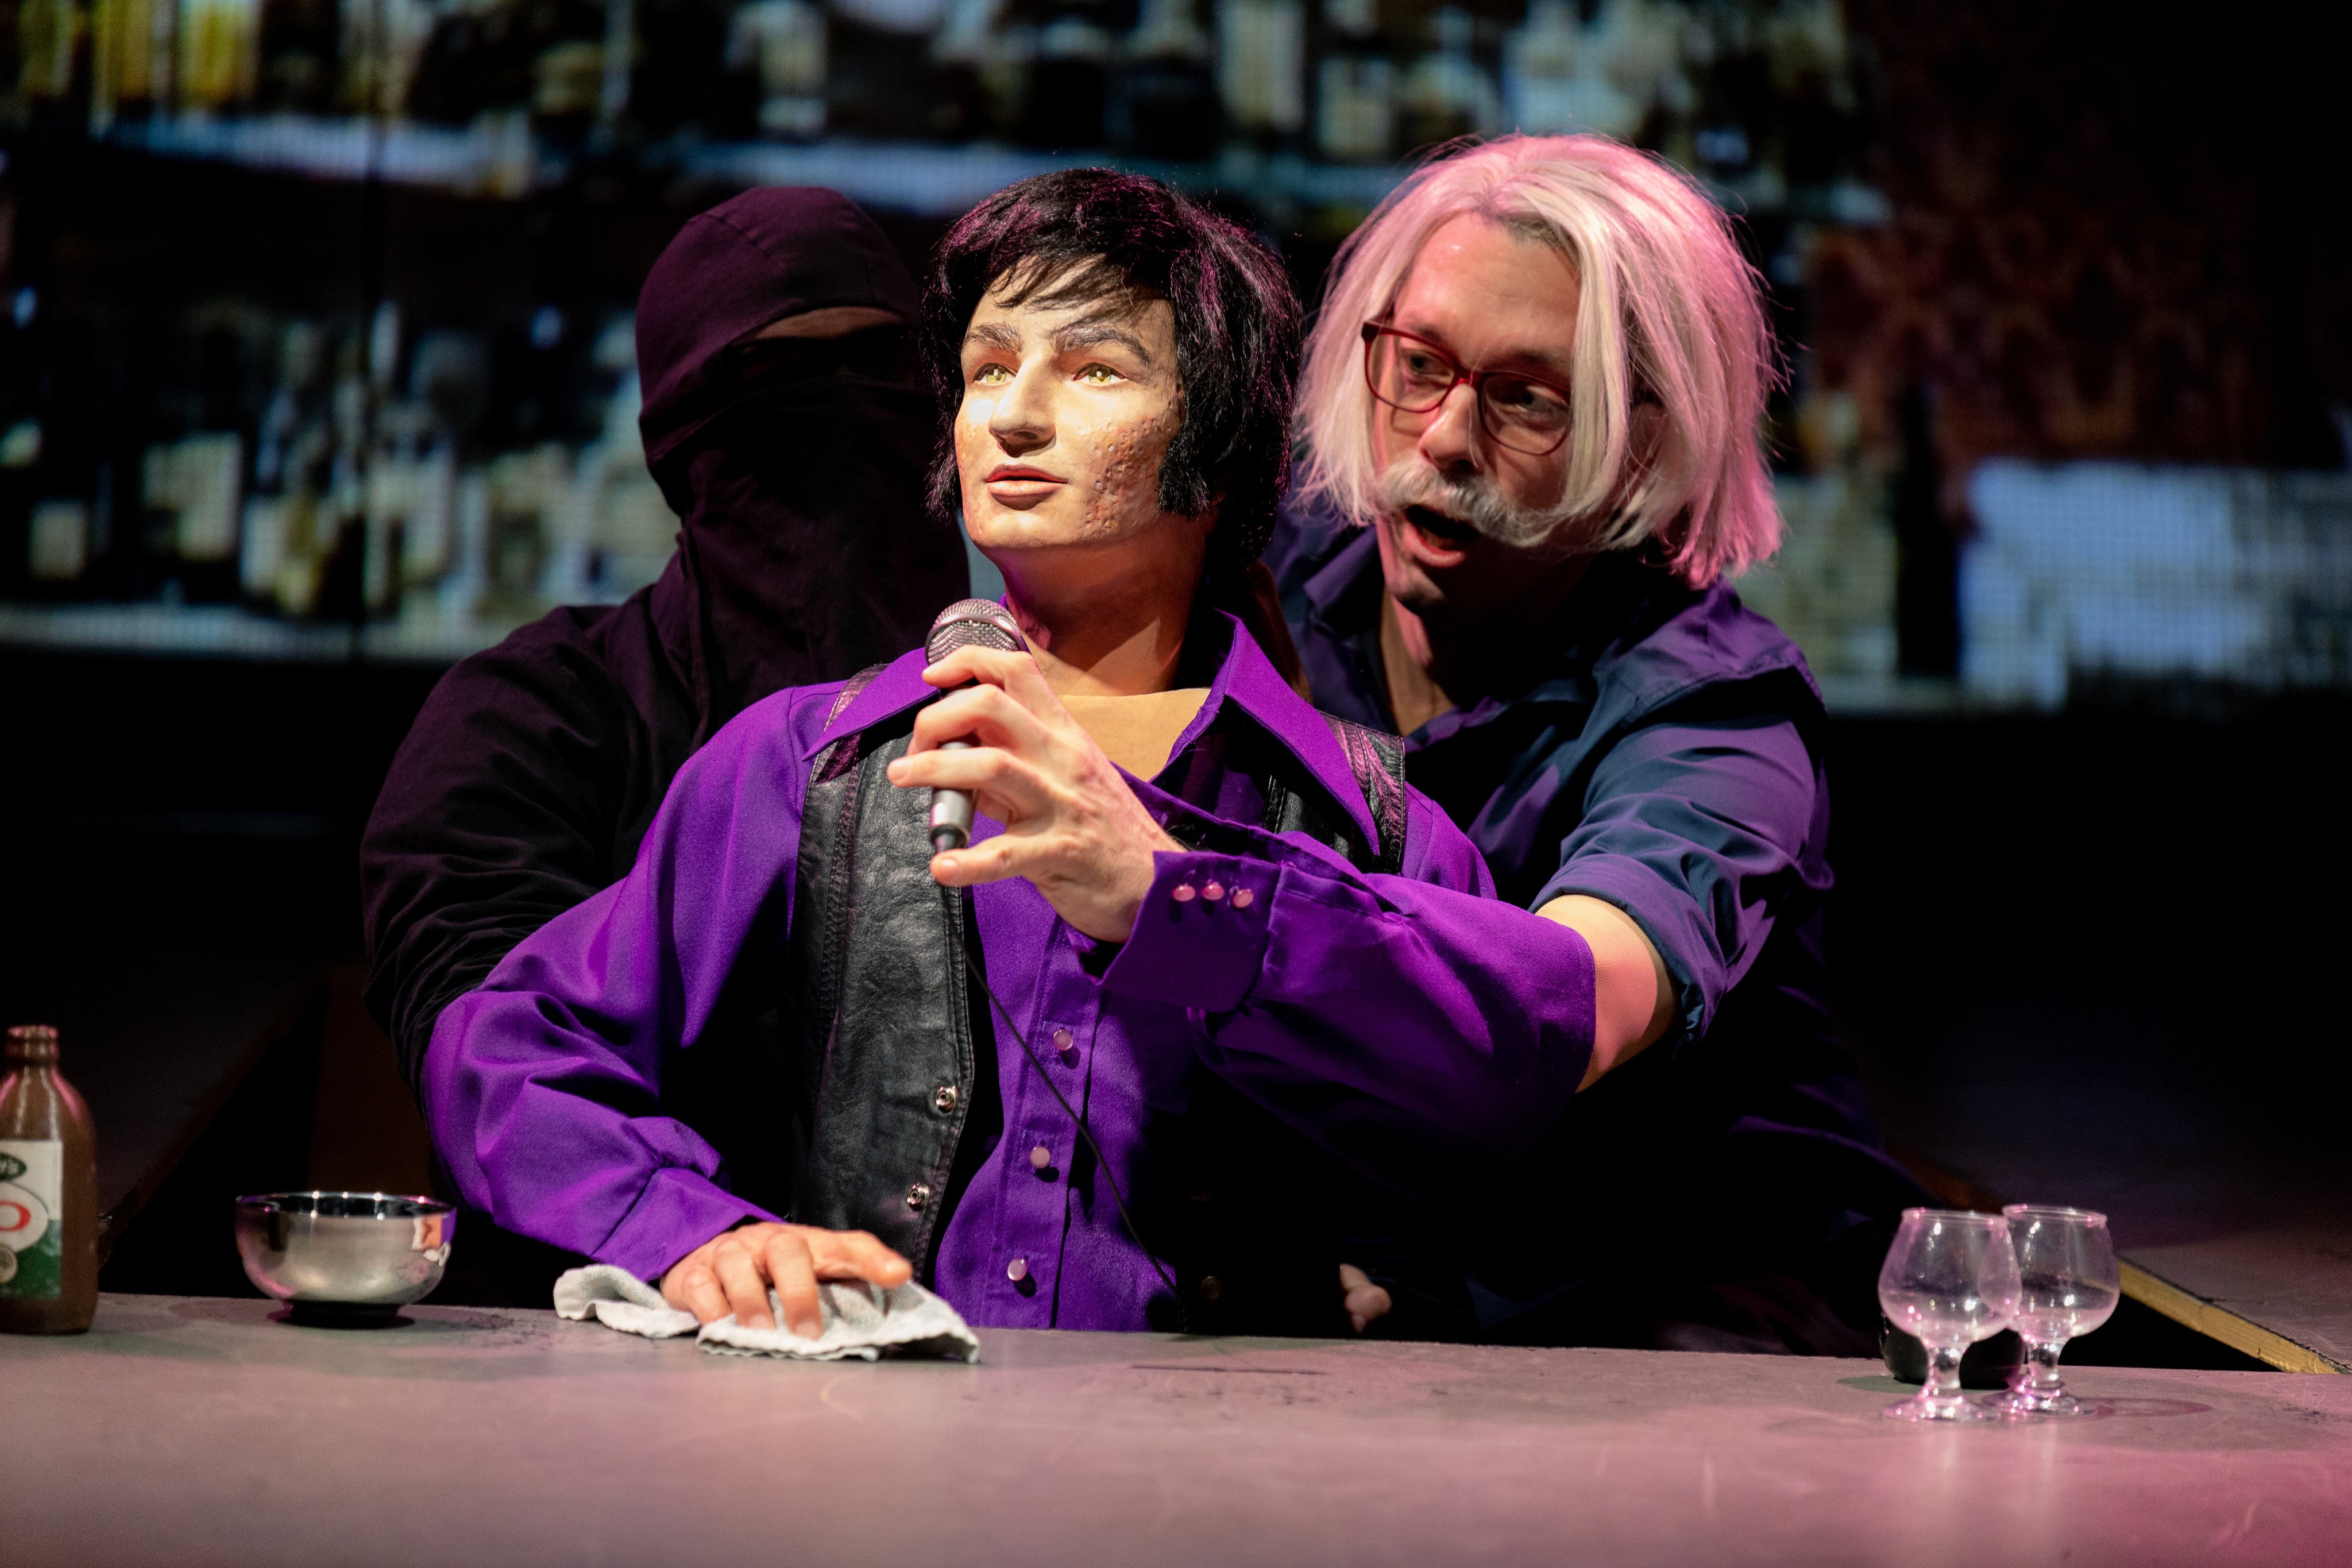 Olivier Normand, the only actor in Robert Lepage’s Courville, with the puppet of protagonist Simon’s alcoholic uncle. The play made deft use ofJapanese-style bunraku puppetry to tell an intense story of teenage trauma in 1970s Quebec. Photo: courtesy of Hong Kong Arts Festival